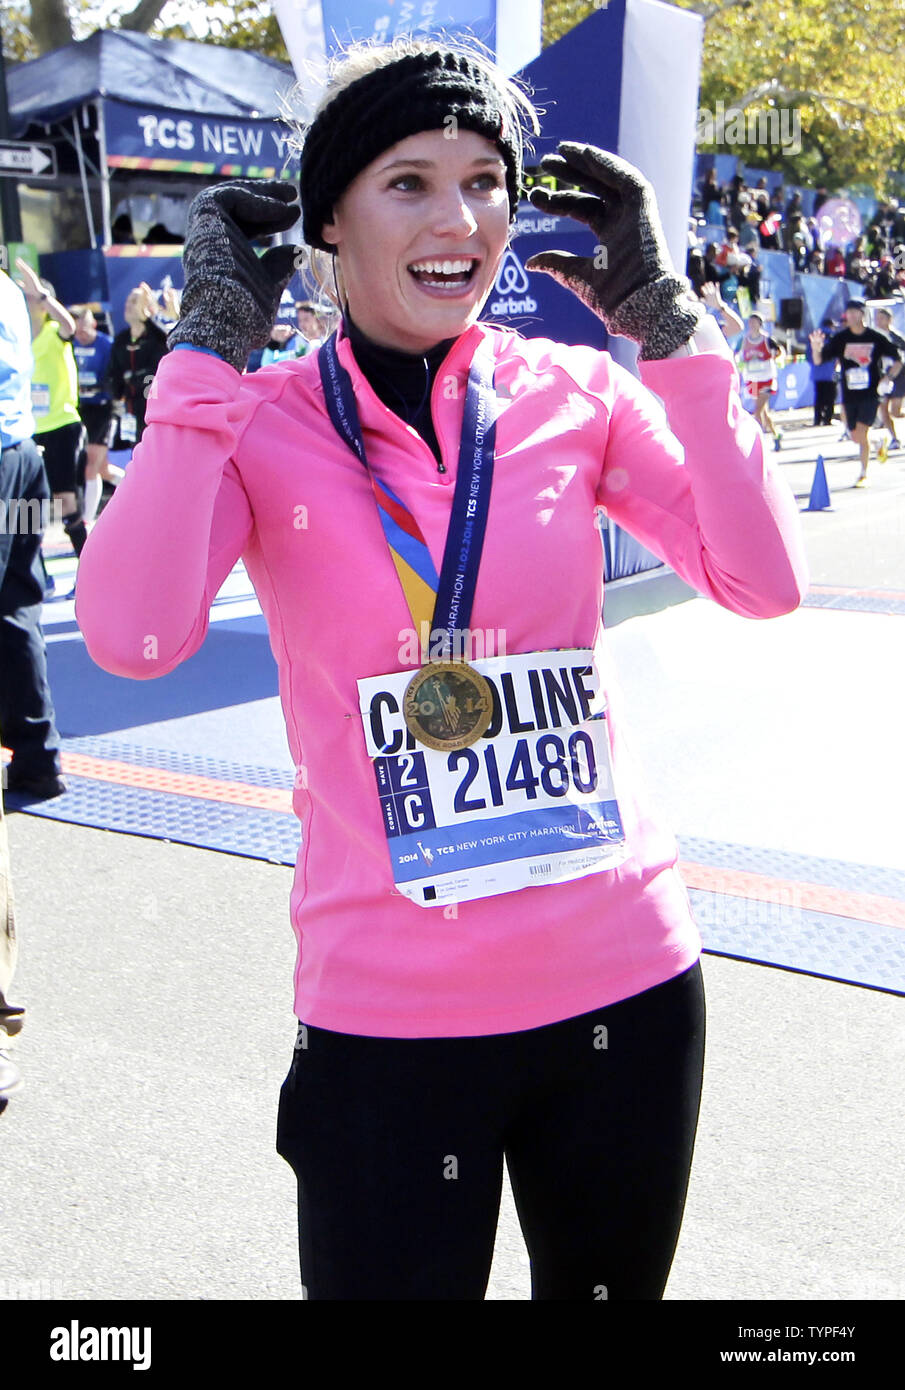 Tennis star Caroline Wozniacki at the finish line after completing the NYRR TCS New York City Marathon in New York City on November 2, 2014. 50,000 runners from the Big Apple